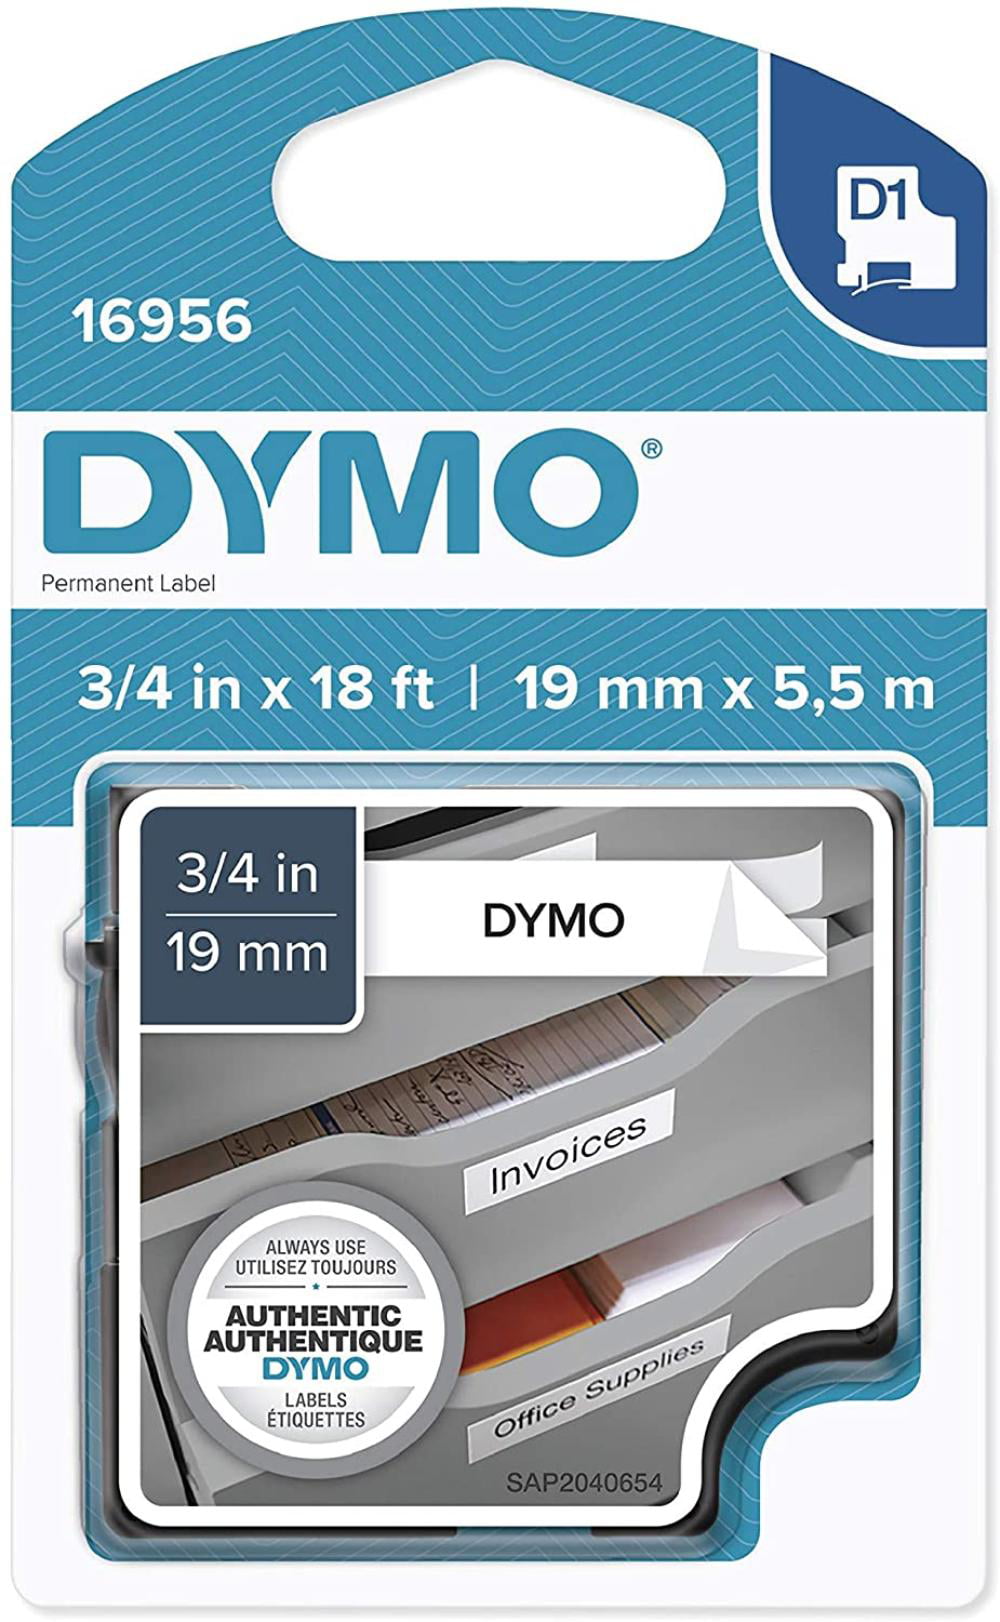 DYMO Permanent High-Performance D1 Self-Adhesive Polyester Tape 3/4-inch 18-foot cartridge DYMO Authentic Black print on White 16956 